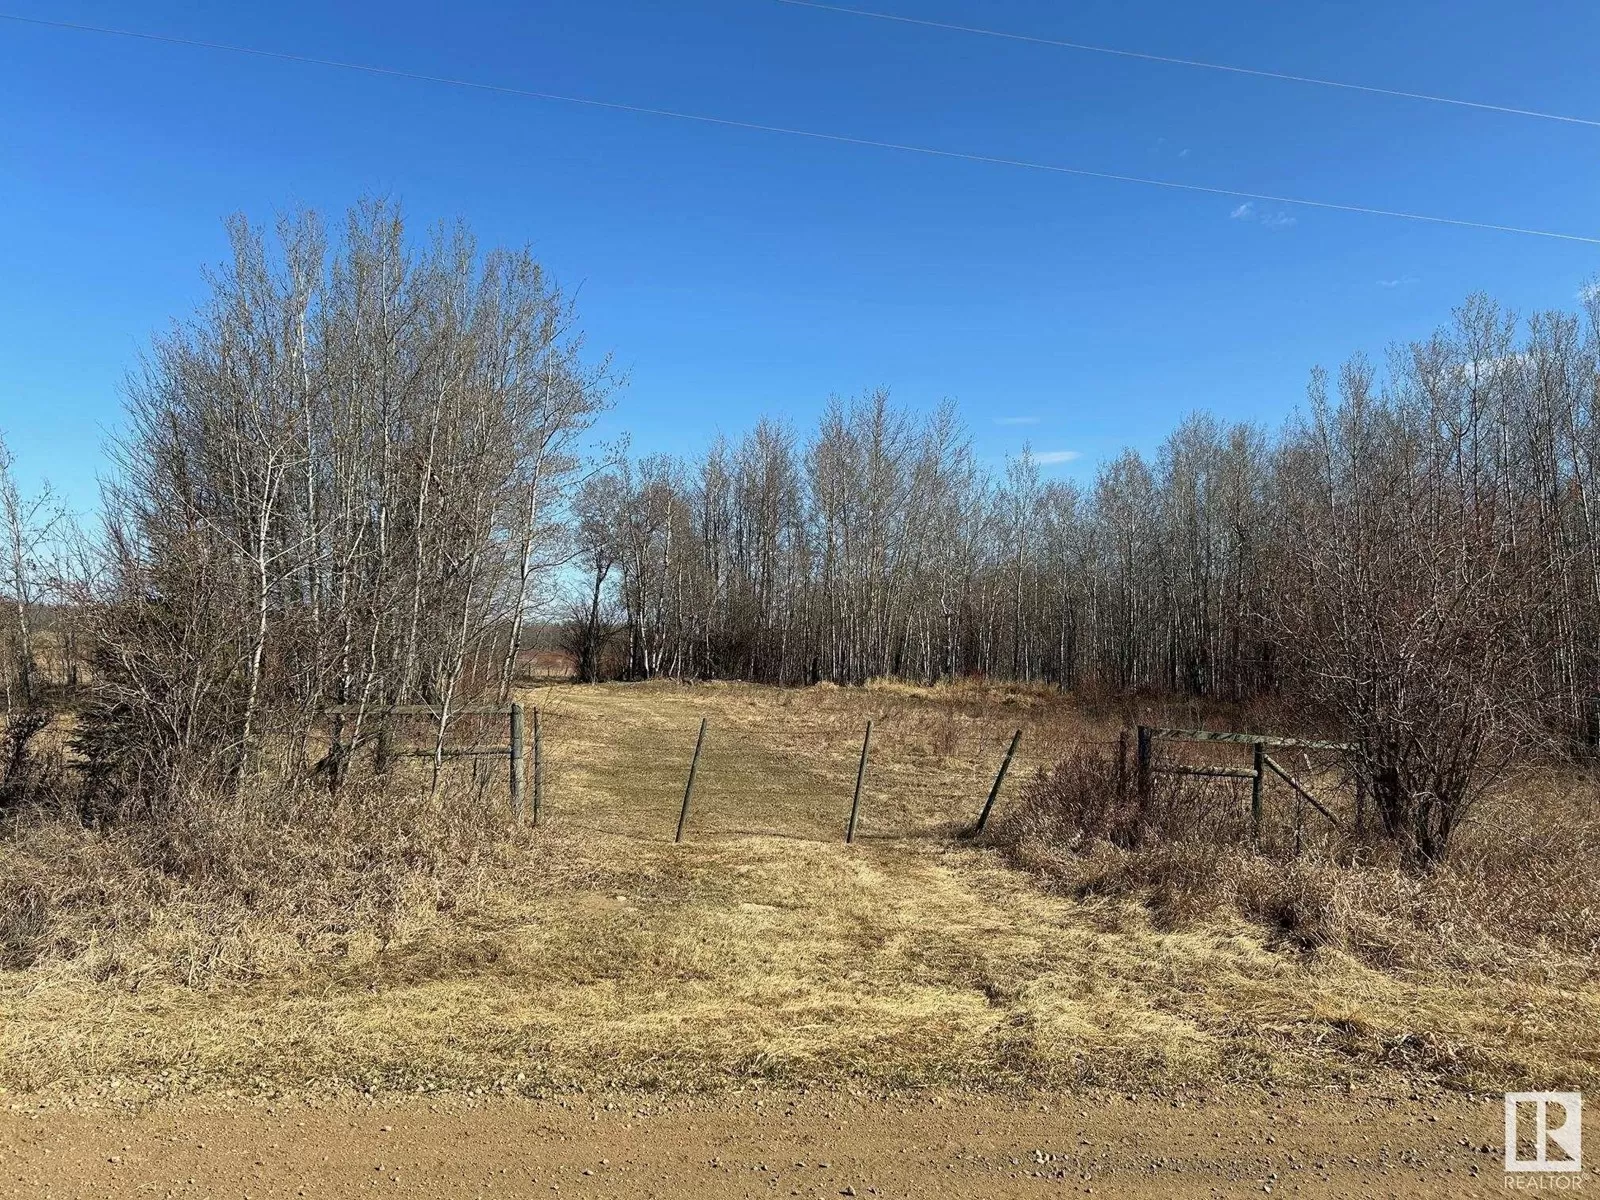 No Building for rent: Twp Rd 594 Rr 230, Rural Thorhild County, Alberta T0A 3J0